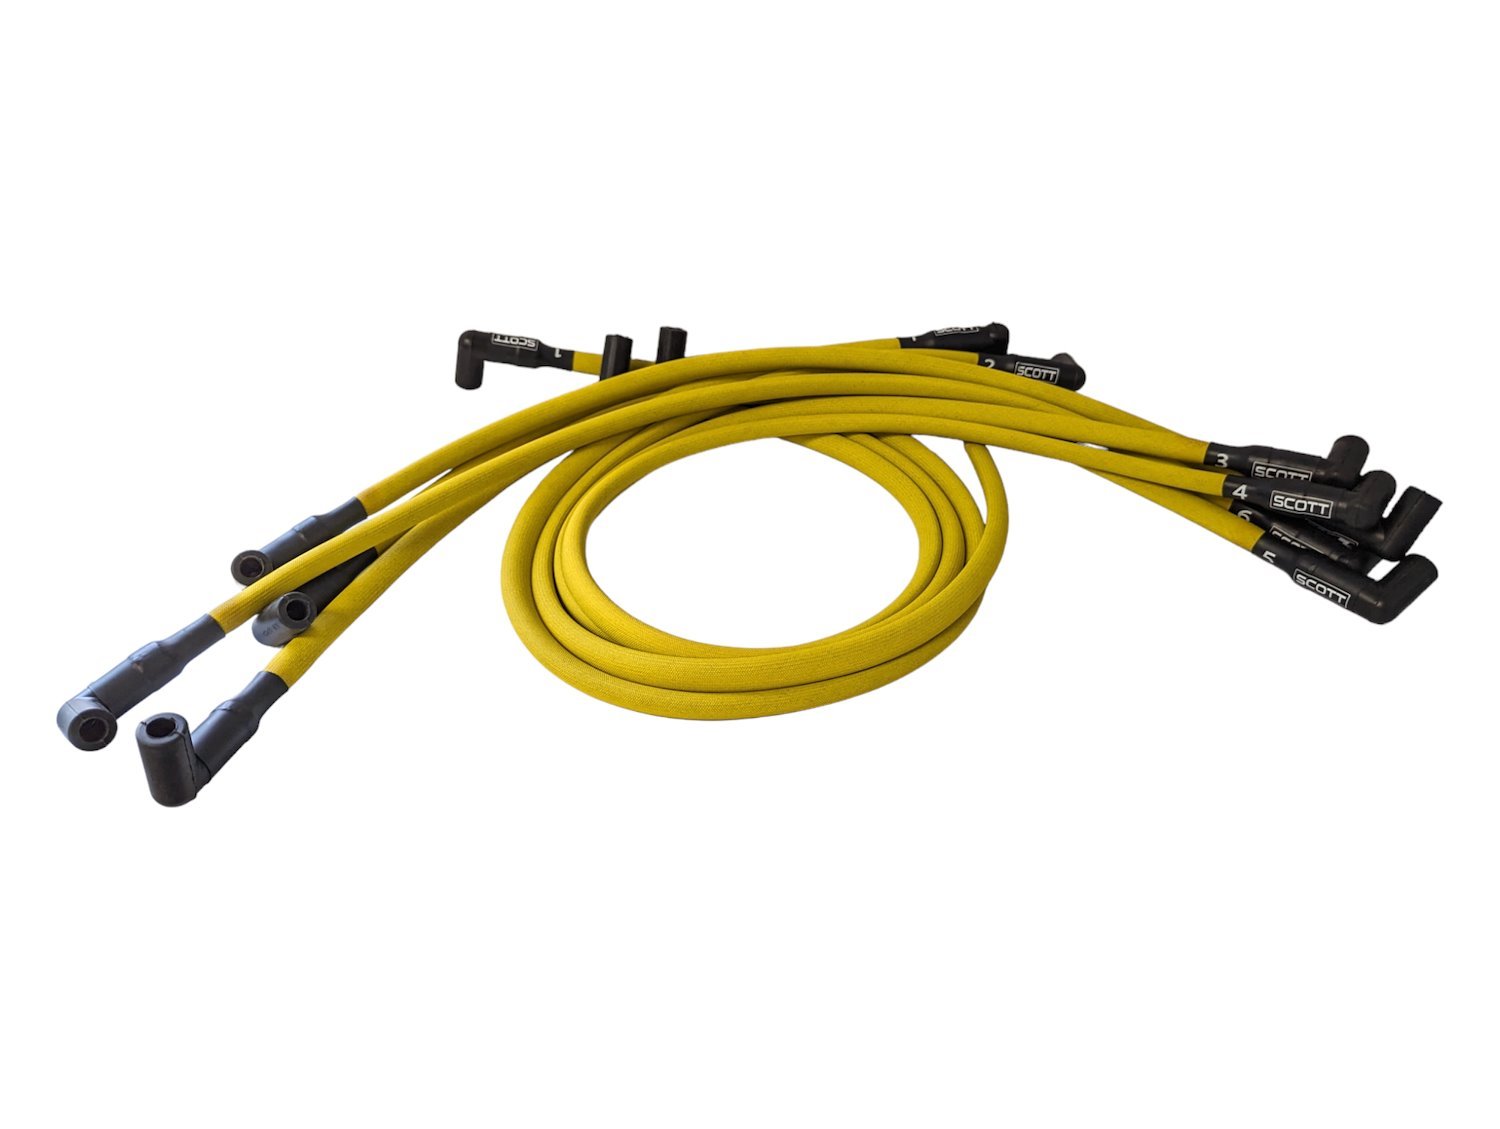 SPW300-PS-437-5 Super Mag Fiberglass-Oversleeved Spark Plug Wire Set for Small Block Chevy, Over & Under [Yellow]